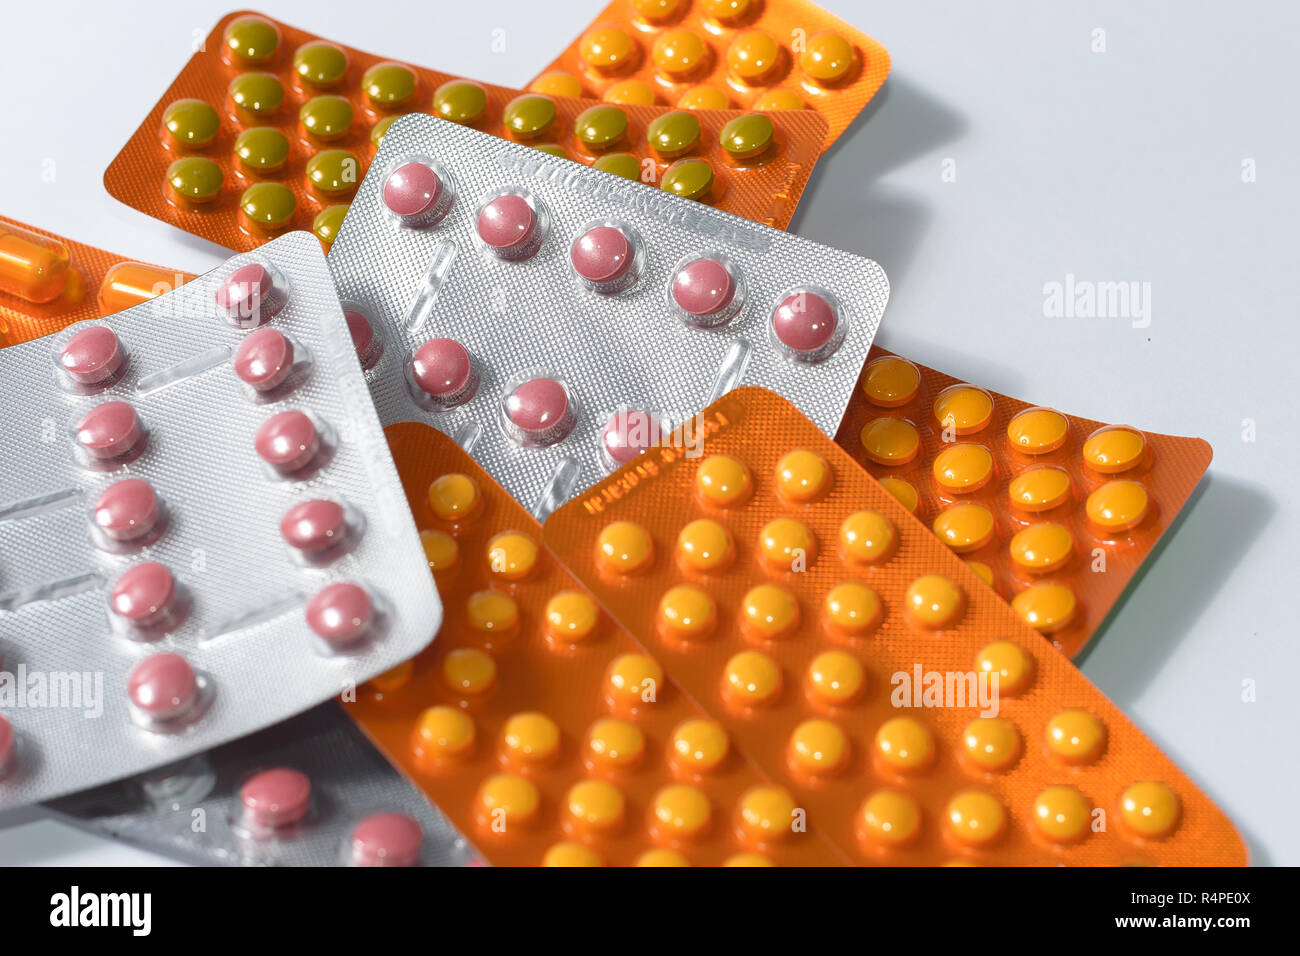 Pile of colorful tablets and capsules pills in blister packs. Global health care and drug use with reasonable concept copyspace Stock Photo